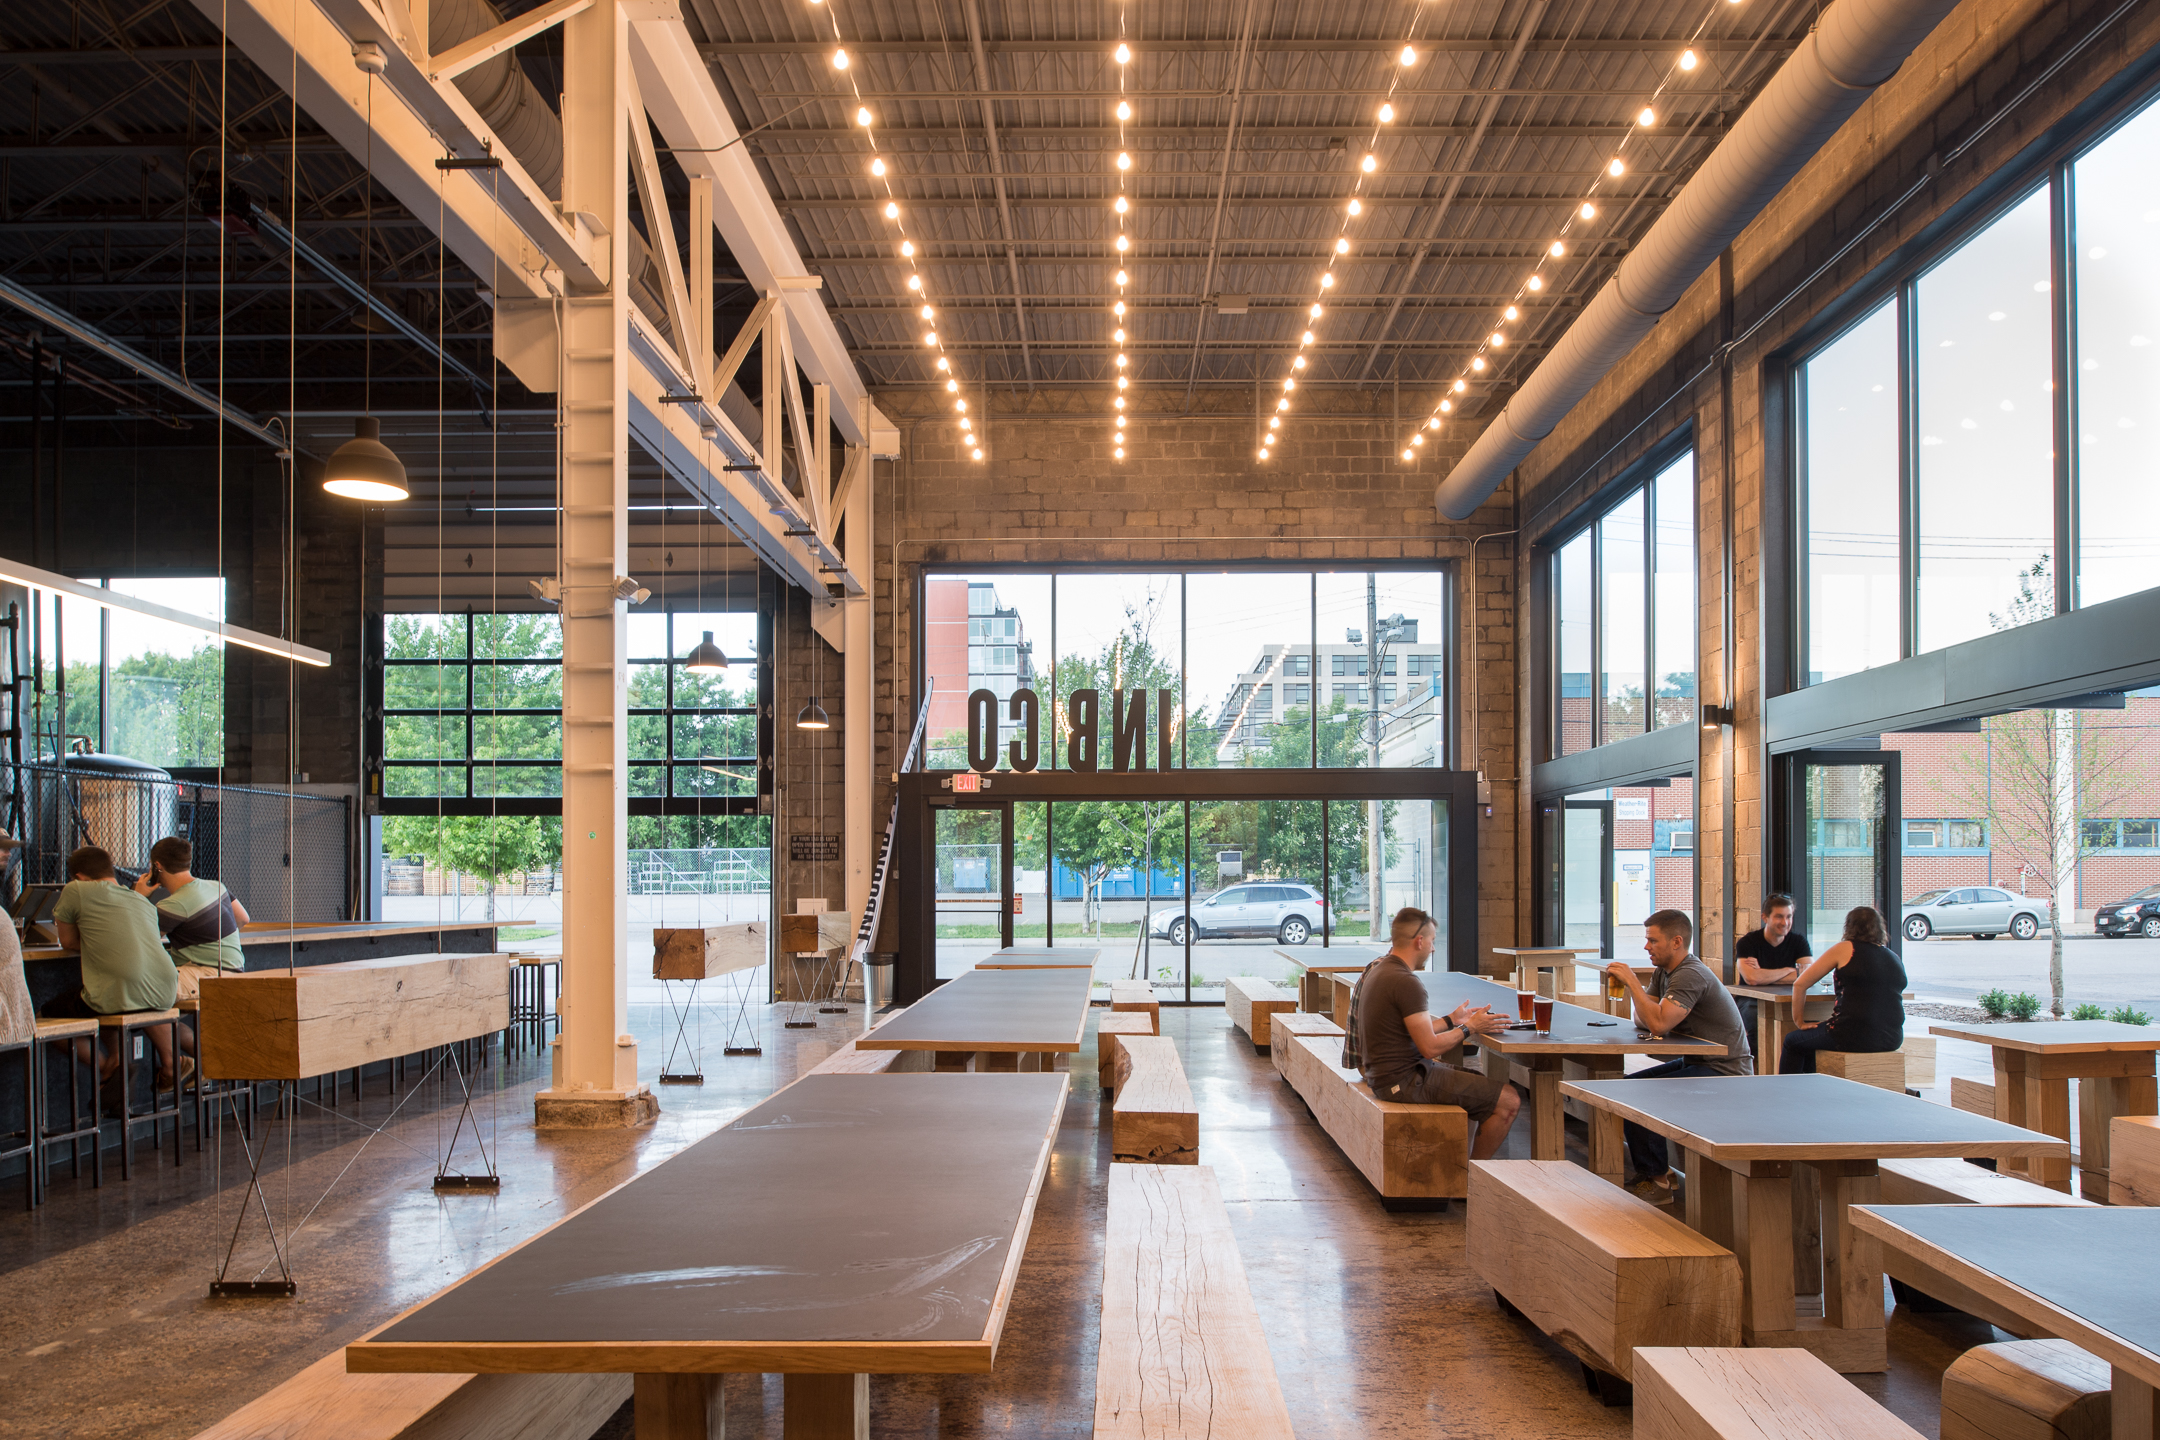 Custom wood tables and benches in modern brewery in Minneapolis by Christian Dean Architecture.